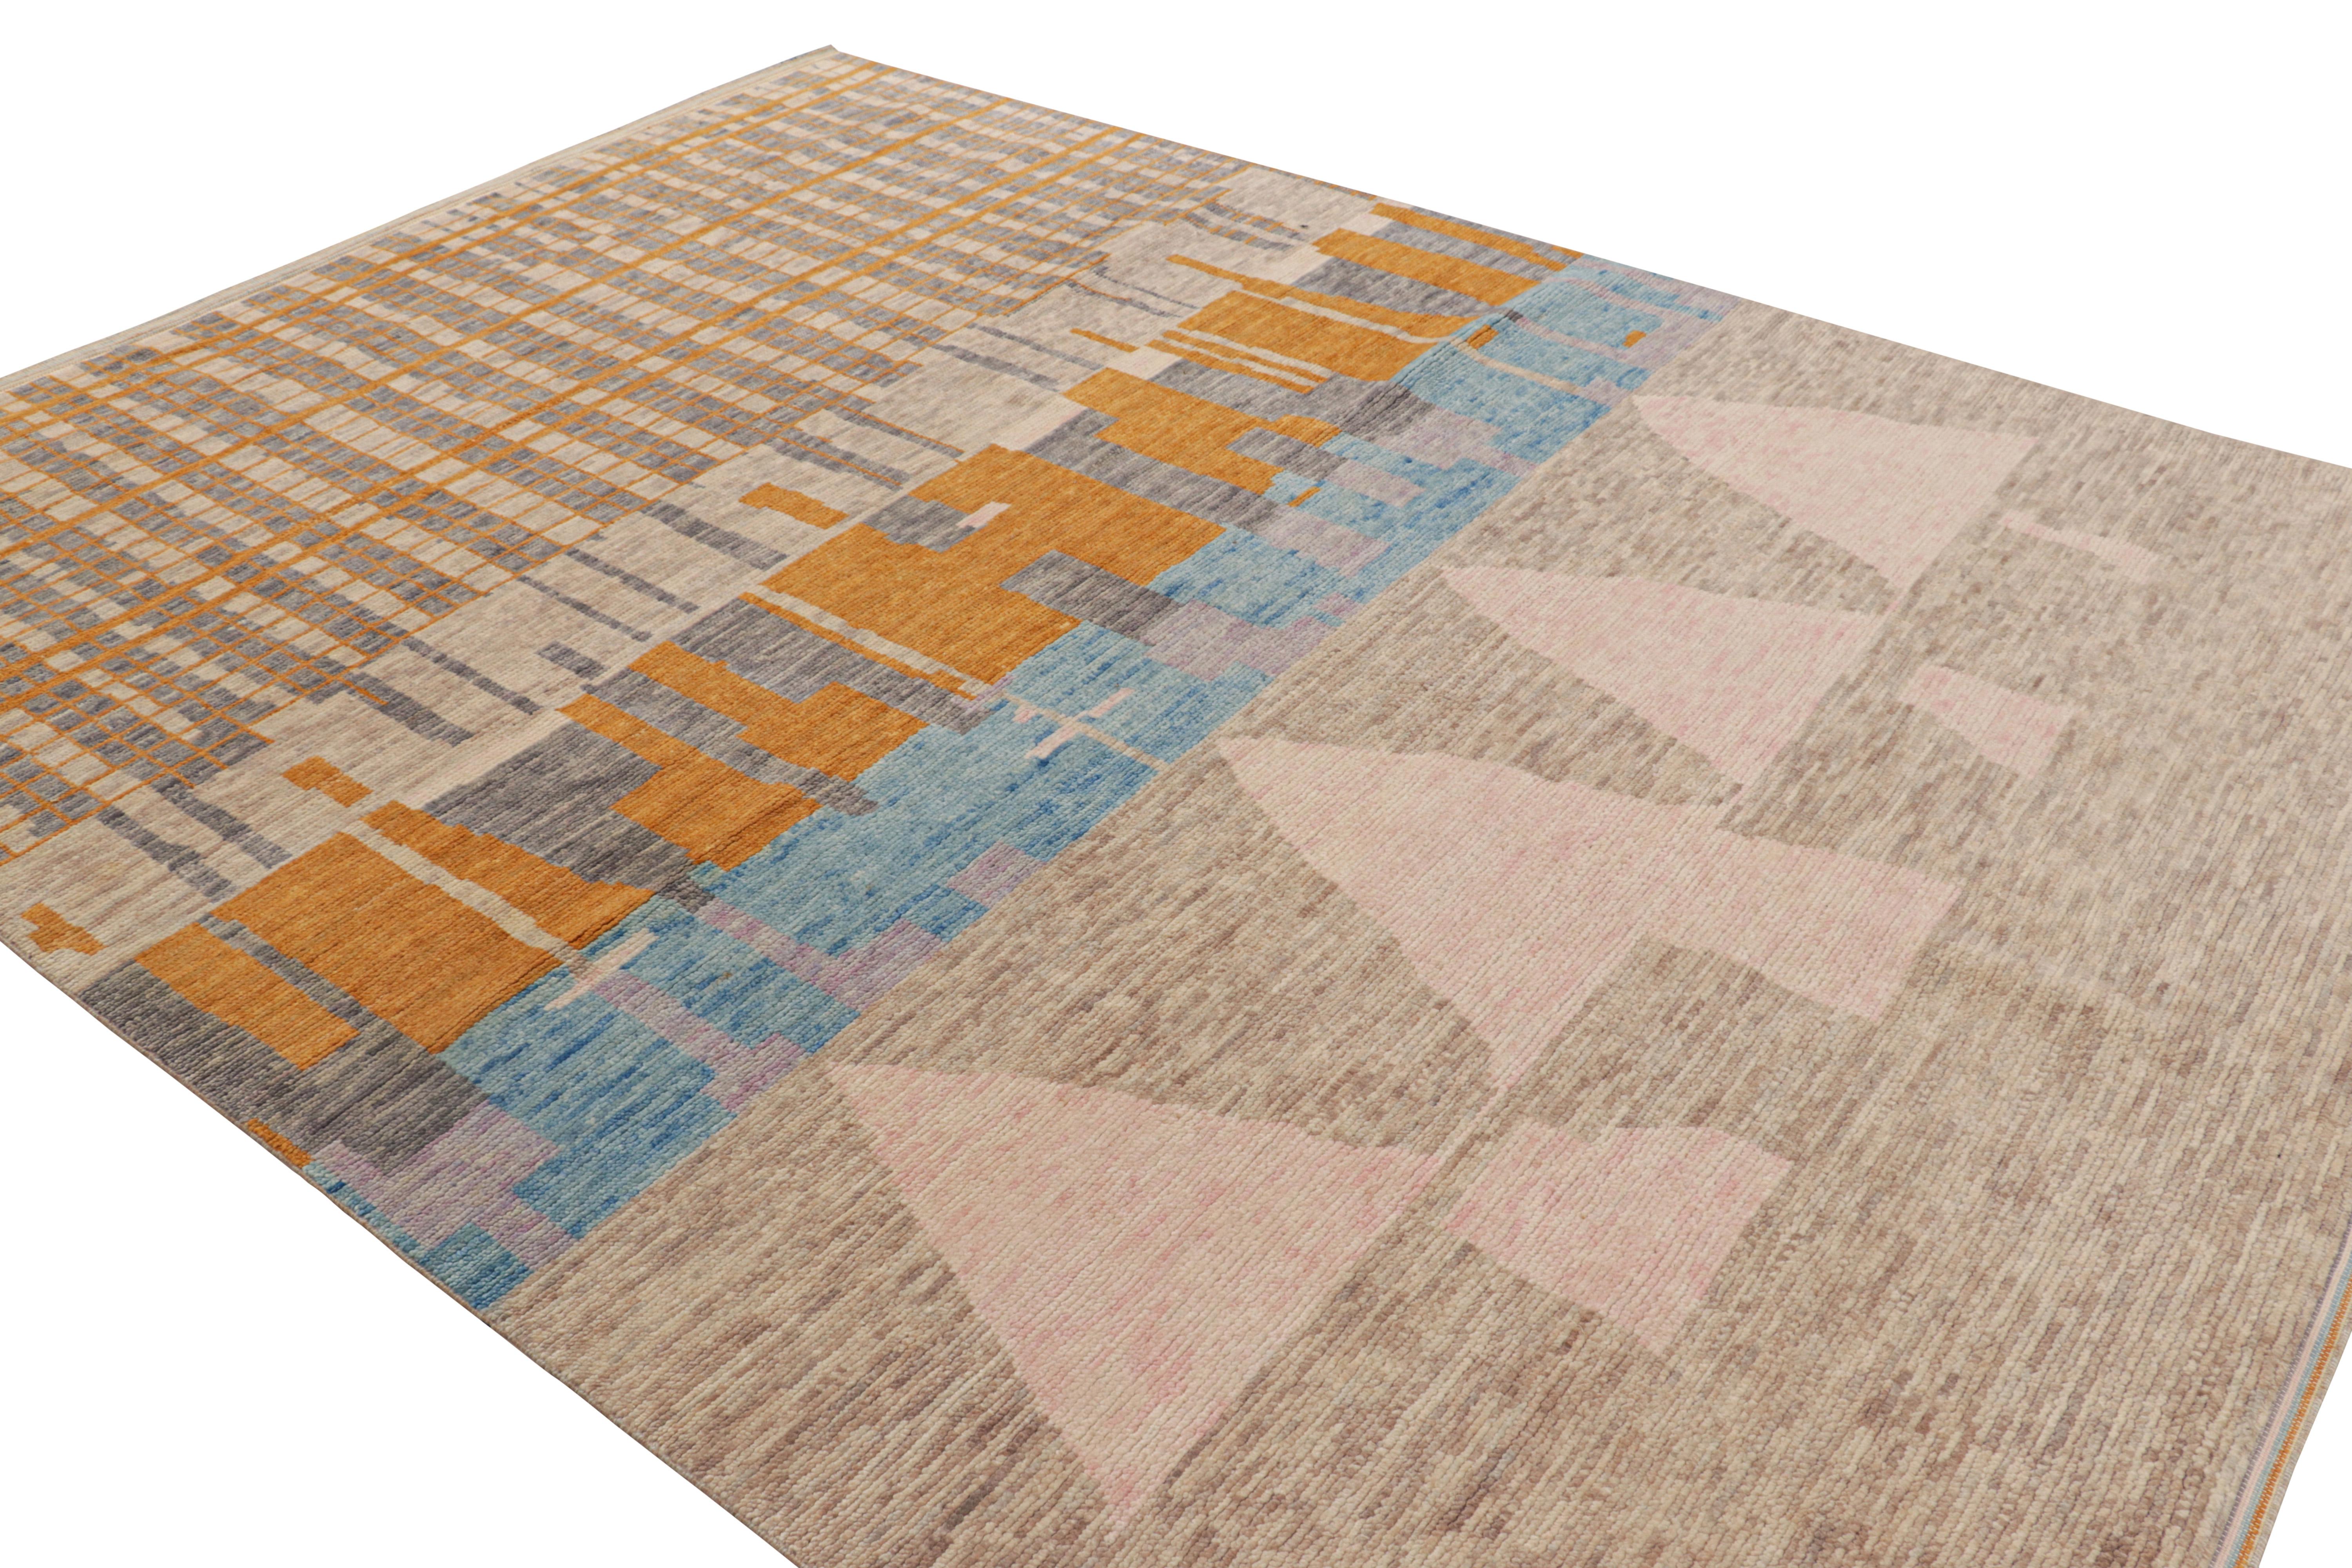 Indian Rug & Kilim’s Moroccan Style Rug in Beige with Geometric Patterns For Sale